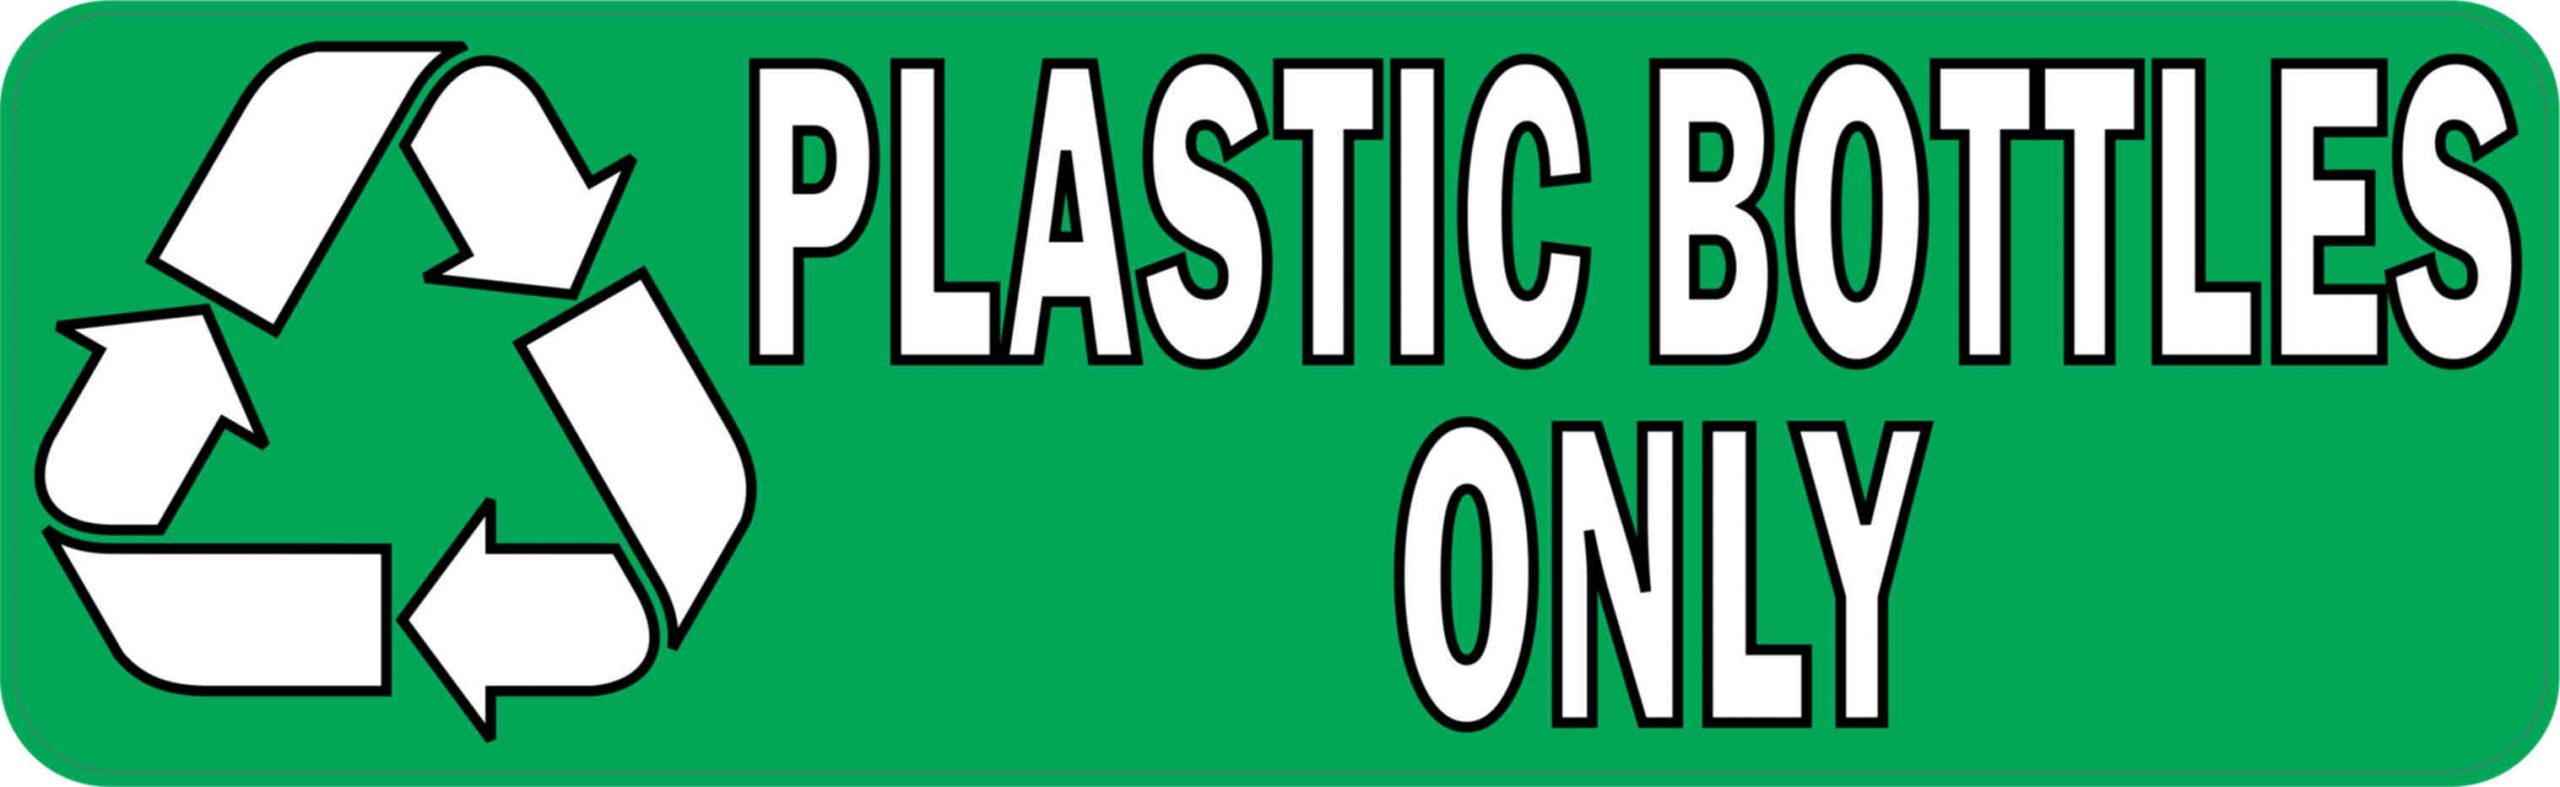 10in-x-3in-plastic-bottles-only-recycling-sticker-vinyl-sign-stickers-decal